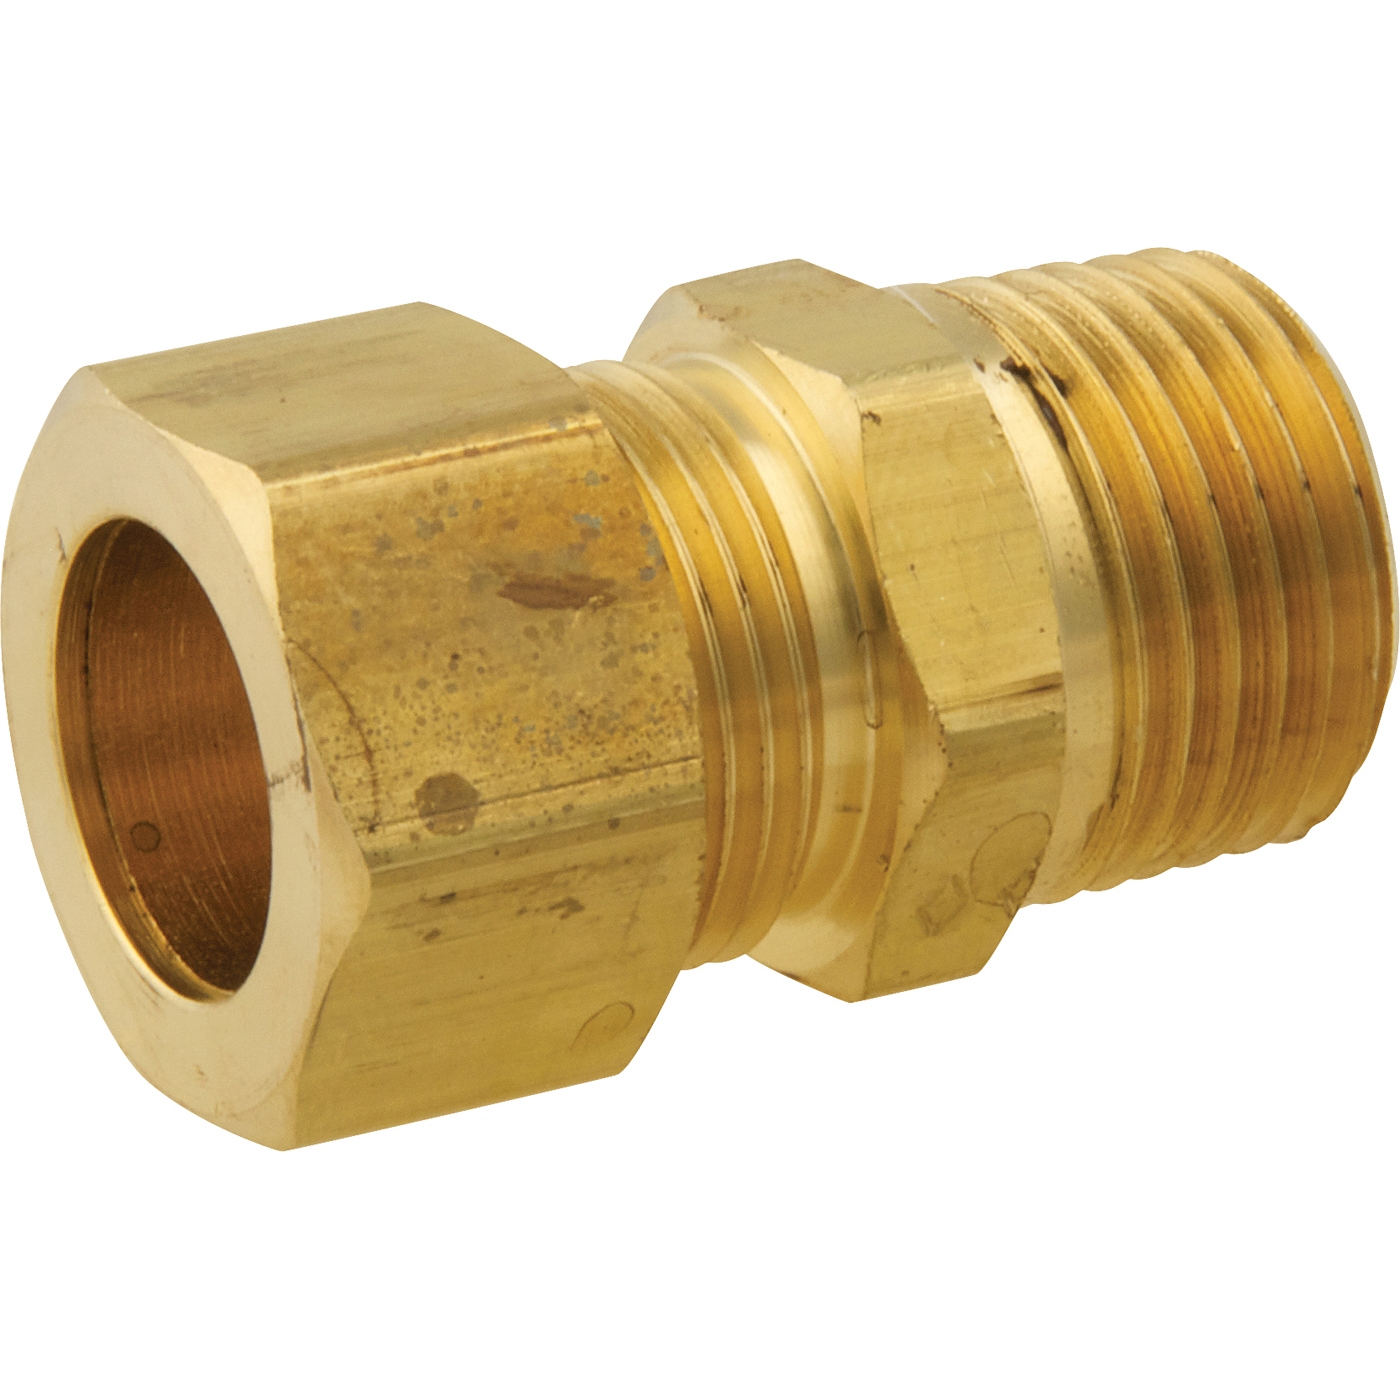 Compression fitting - Male reducing adapter - Master Plumber®